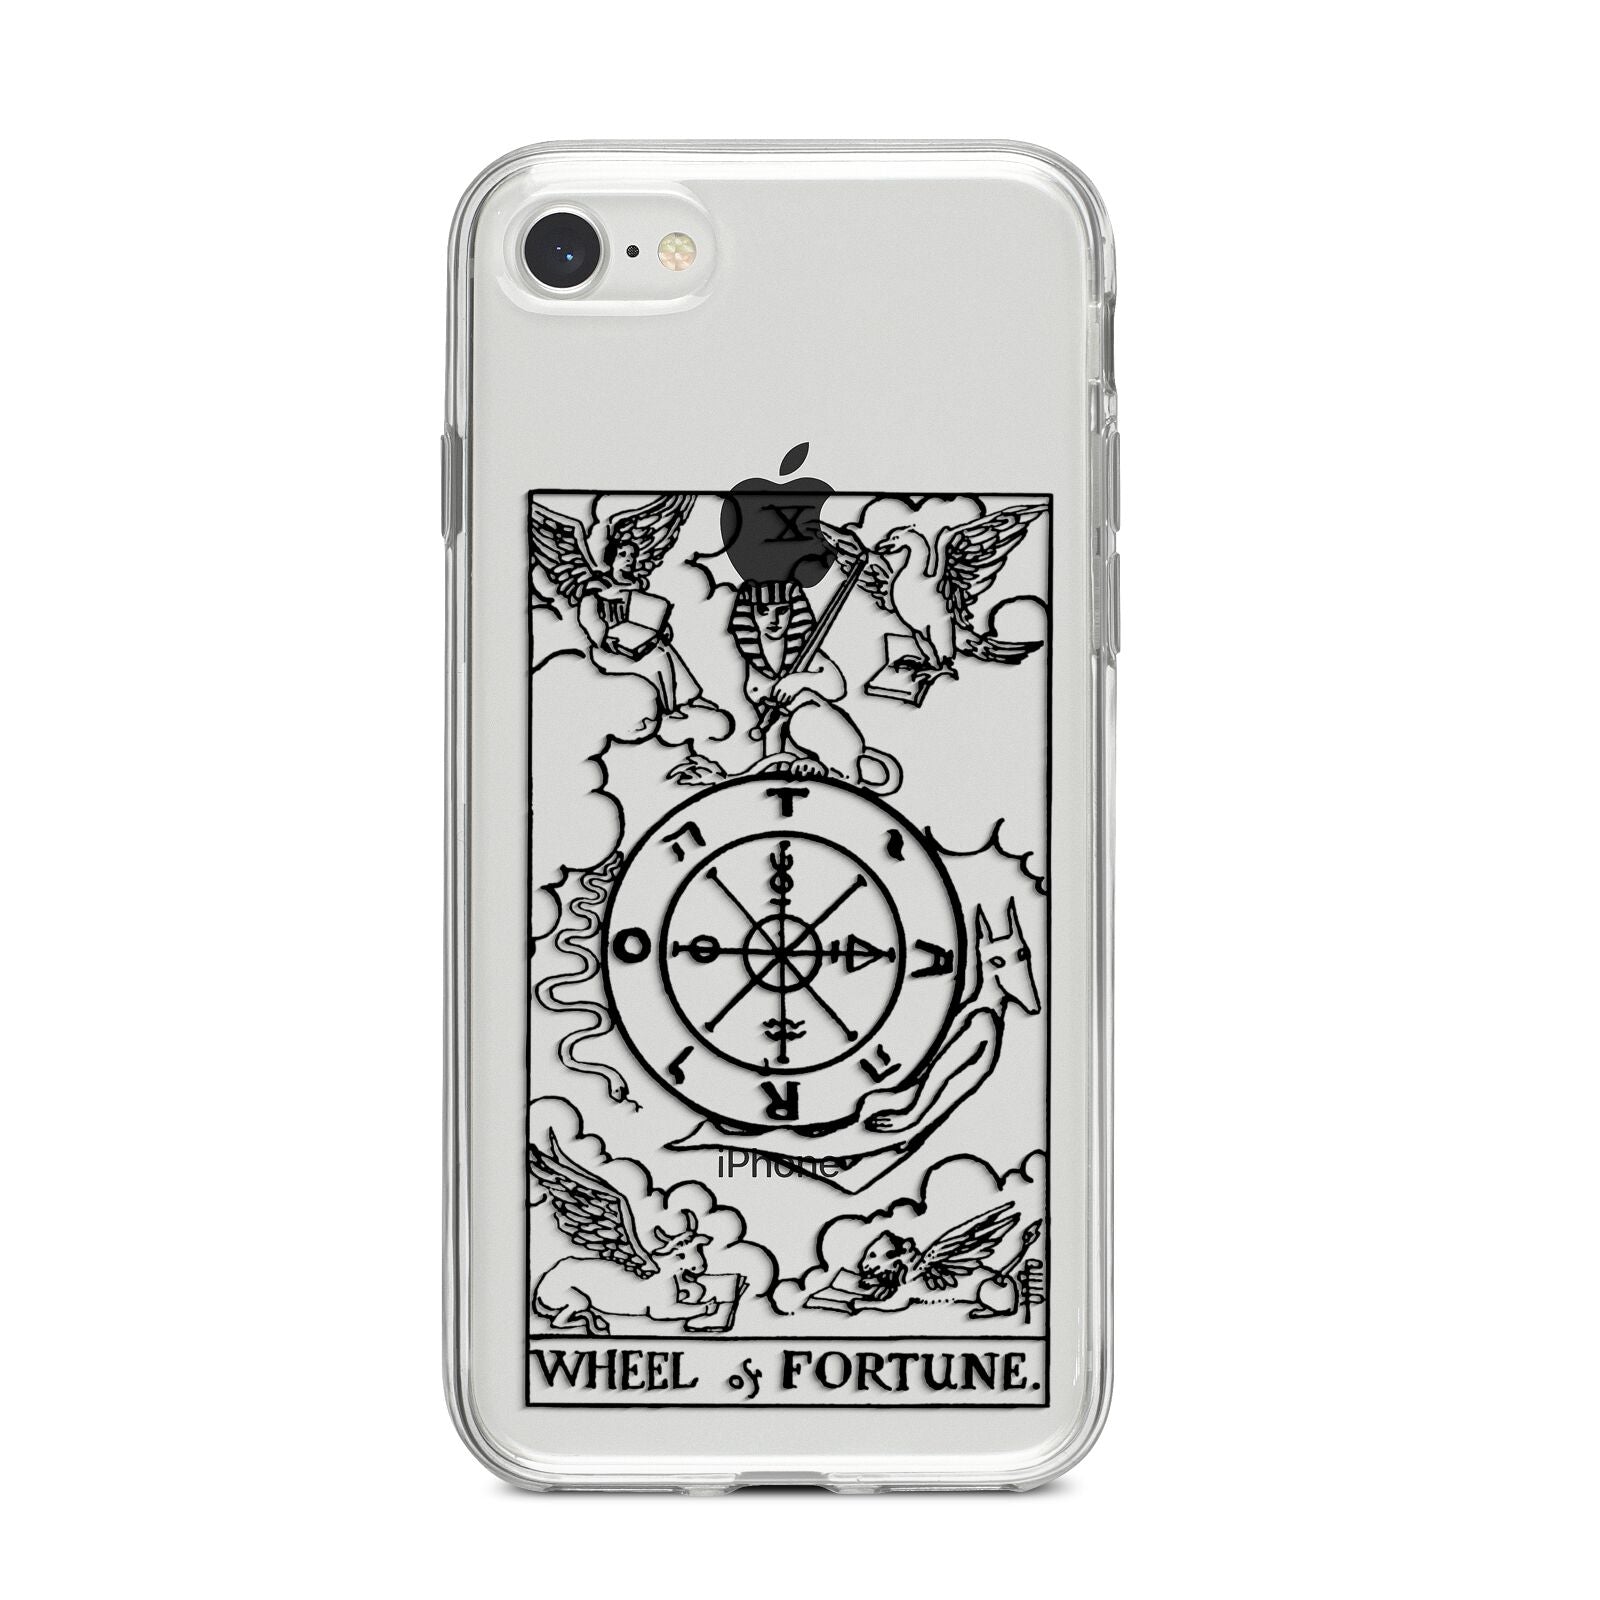 Wheel of Fortune Monochrome Tarot Card iPhone 8 Bumper Case on Silver iPhone